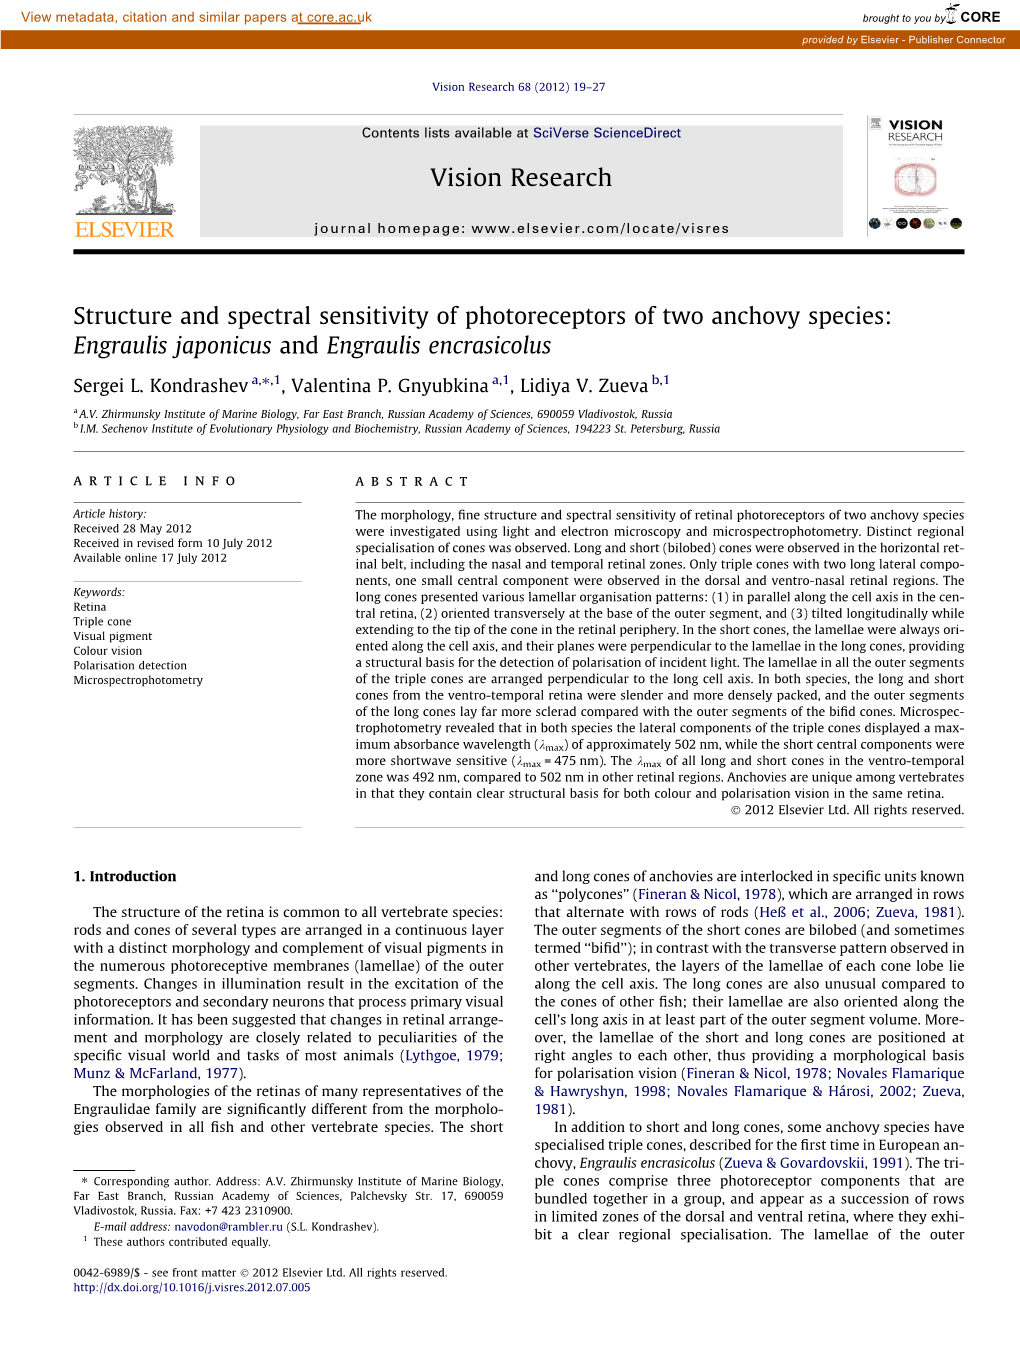 Structure and Spectral Sensitivity of Photoreceptors of Two Anchovy Species: Engraulis Japonicus and Engraulis Encrasicolus ⇑ Sergei L